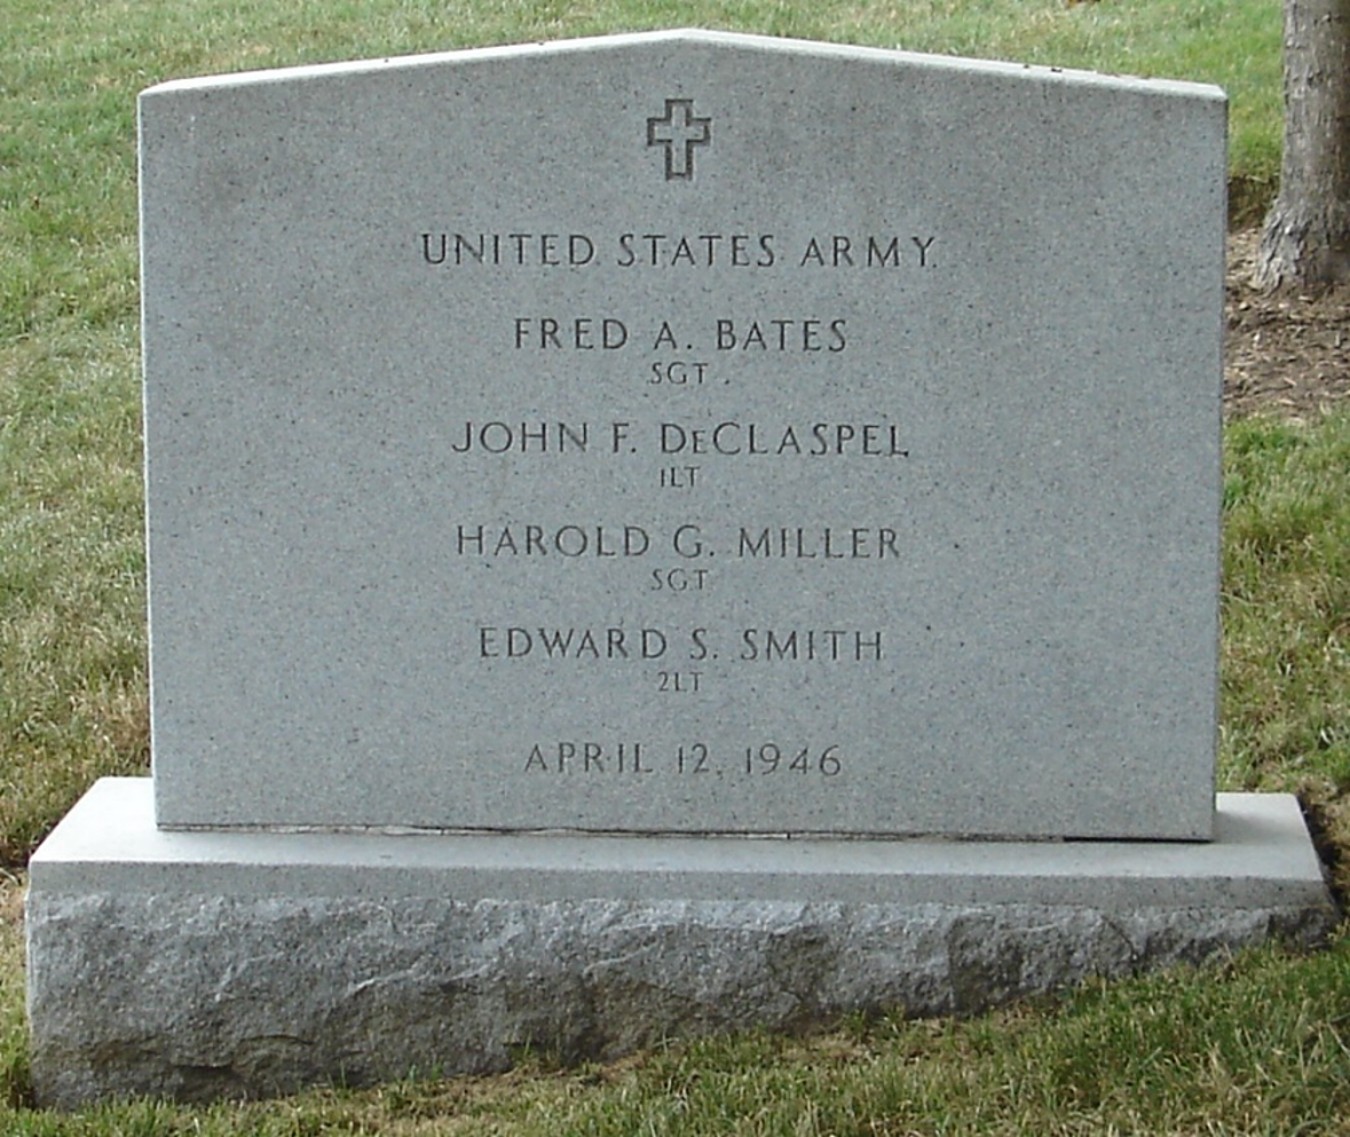 army-group-04121956-gravesite-photo-august-2006-001